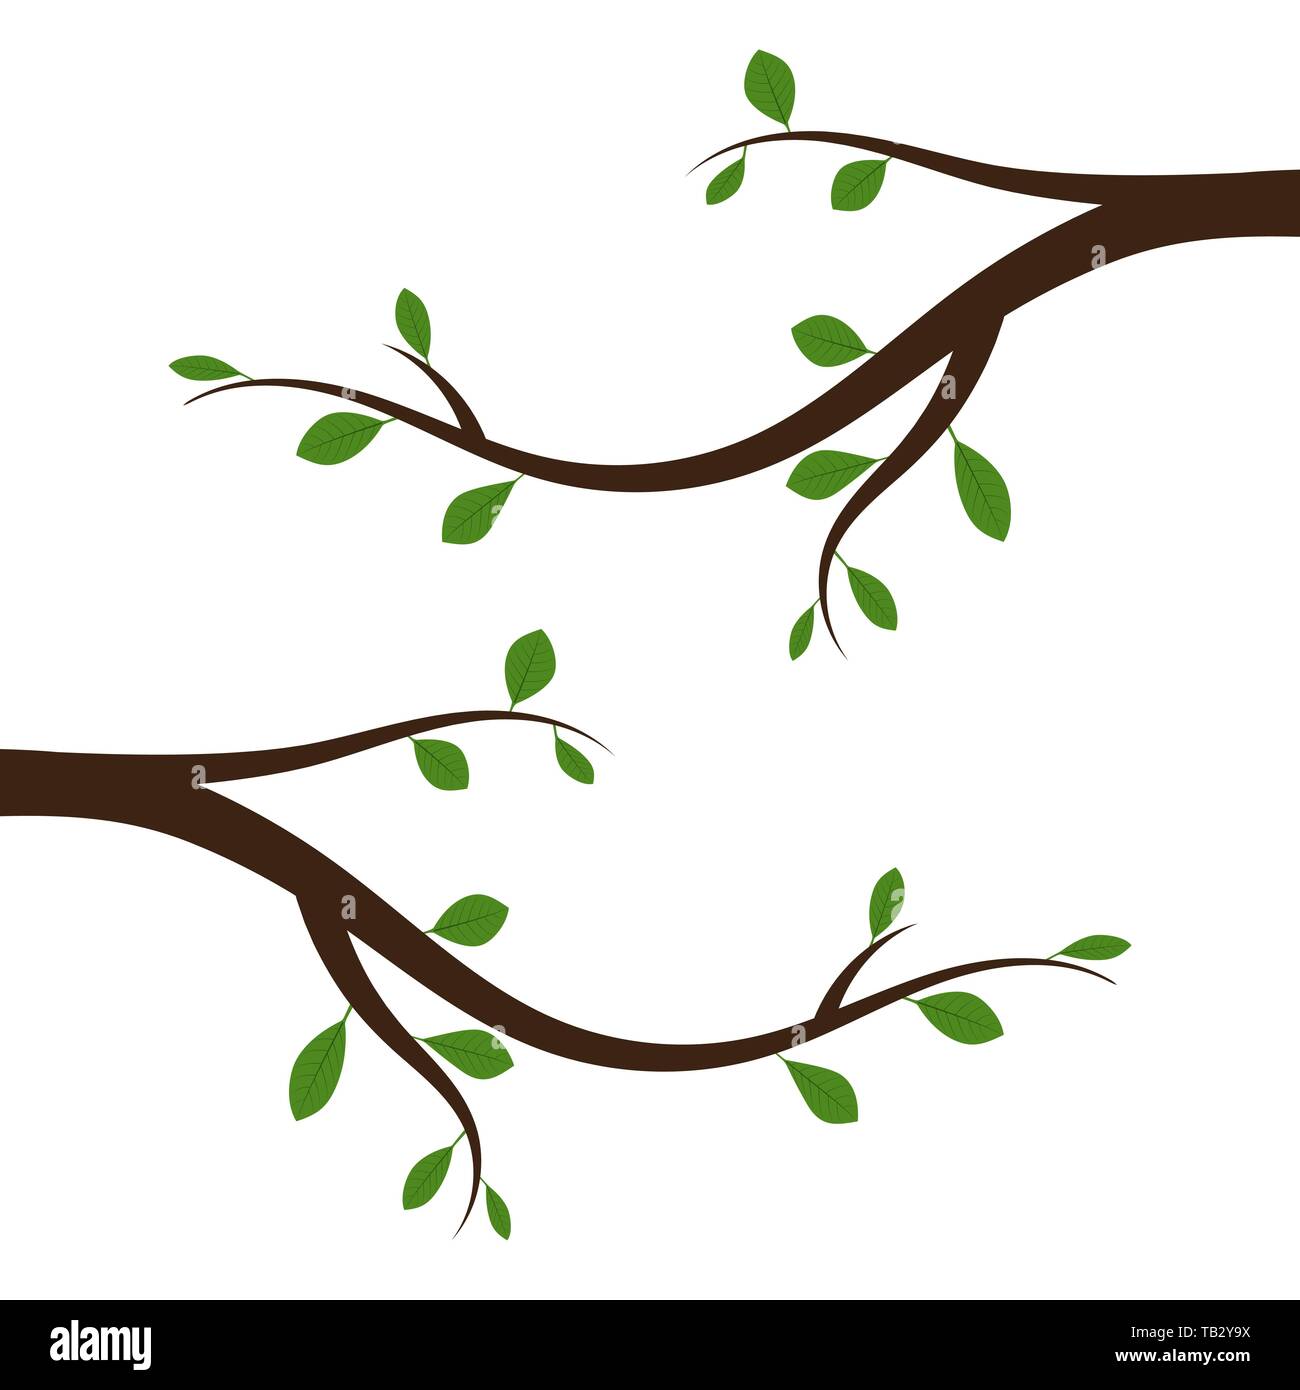 Tree branch with green leaves. Vector illustration. Abstract branch